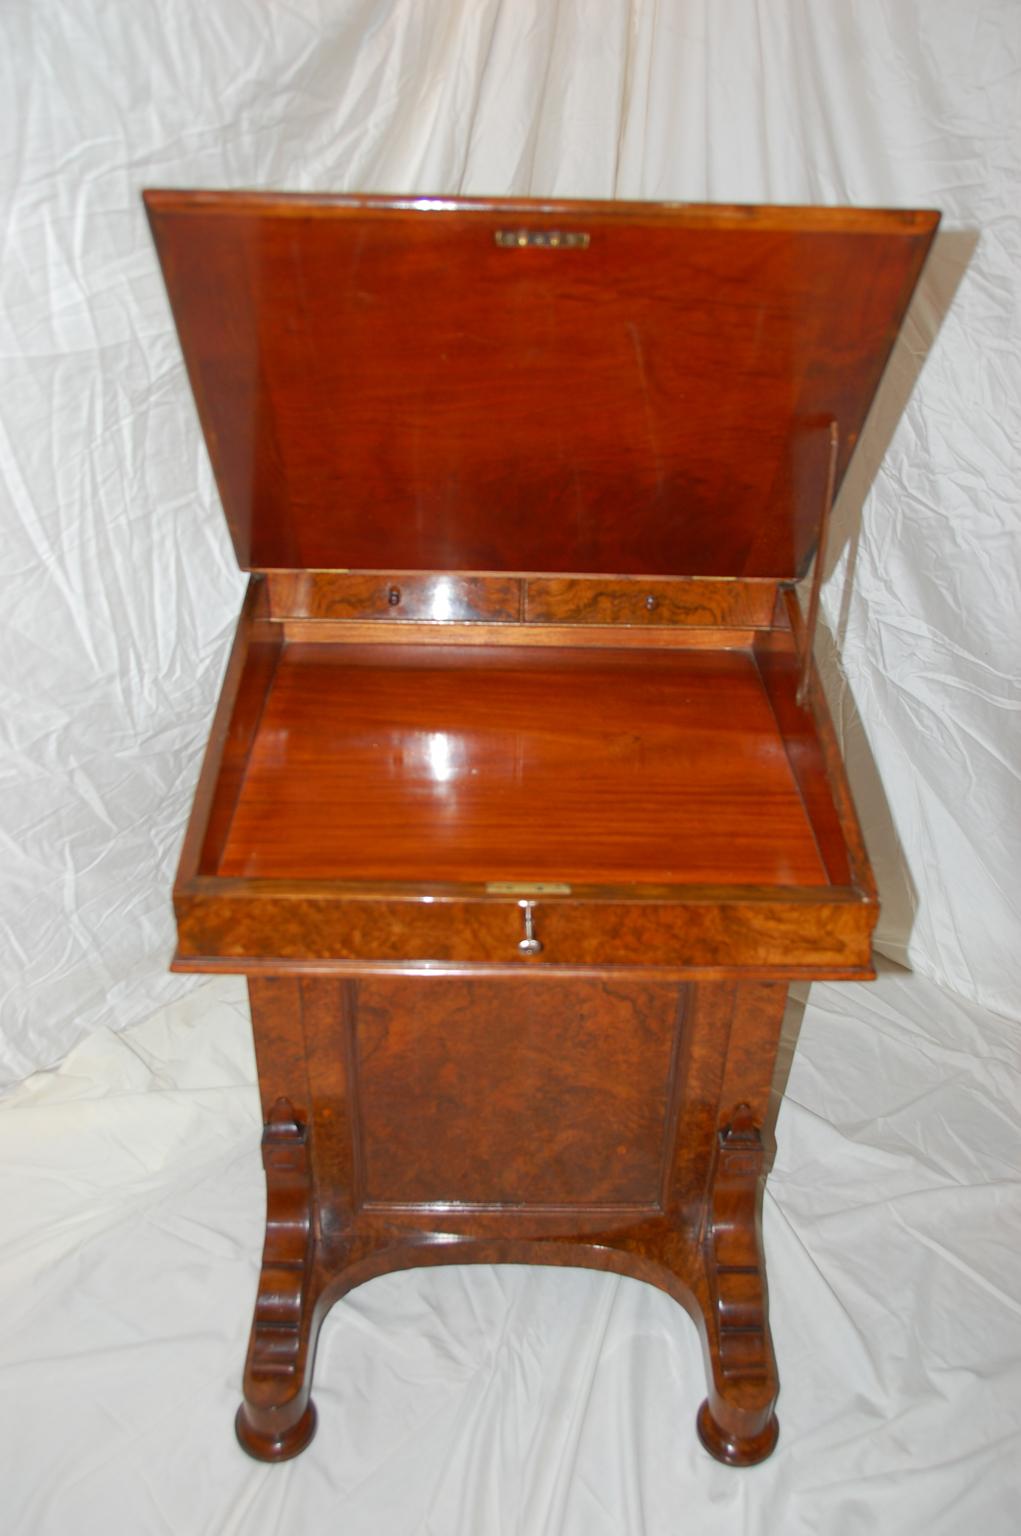 English Mid-19th Century Burl Walnut Davenport Desk with Leathered Writing Slope In Good Condition For Sale In Wells, ME